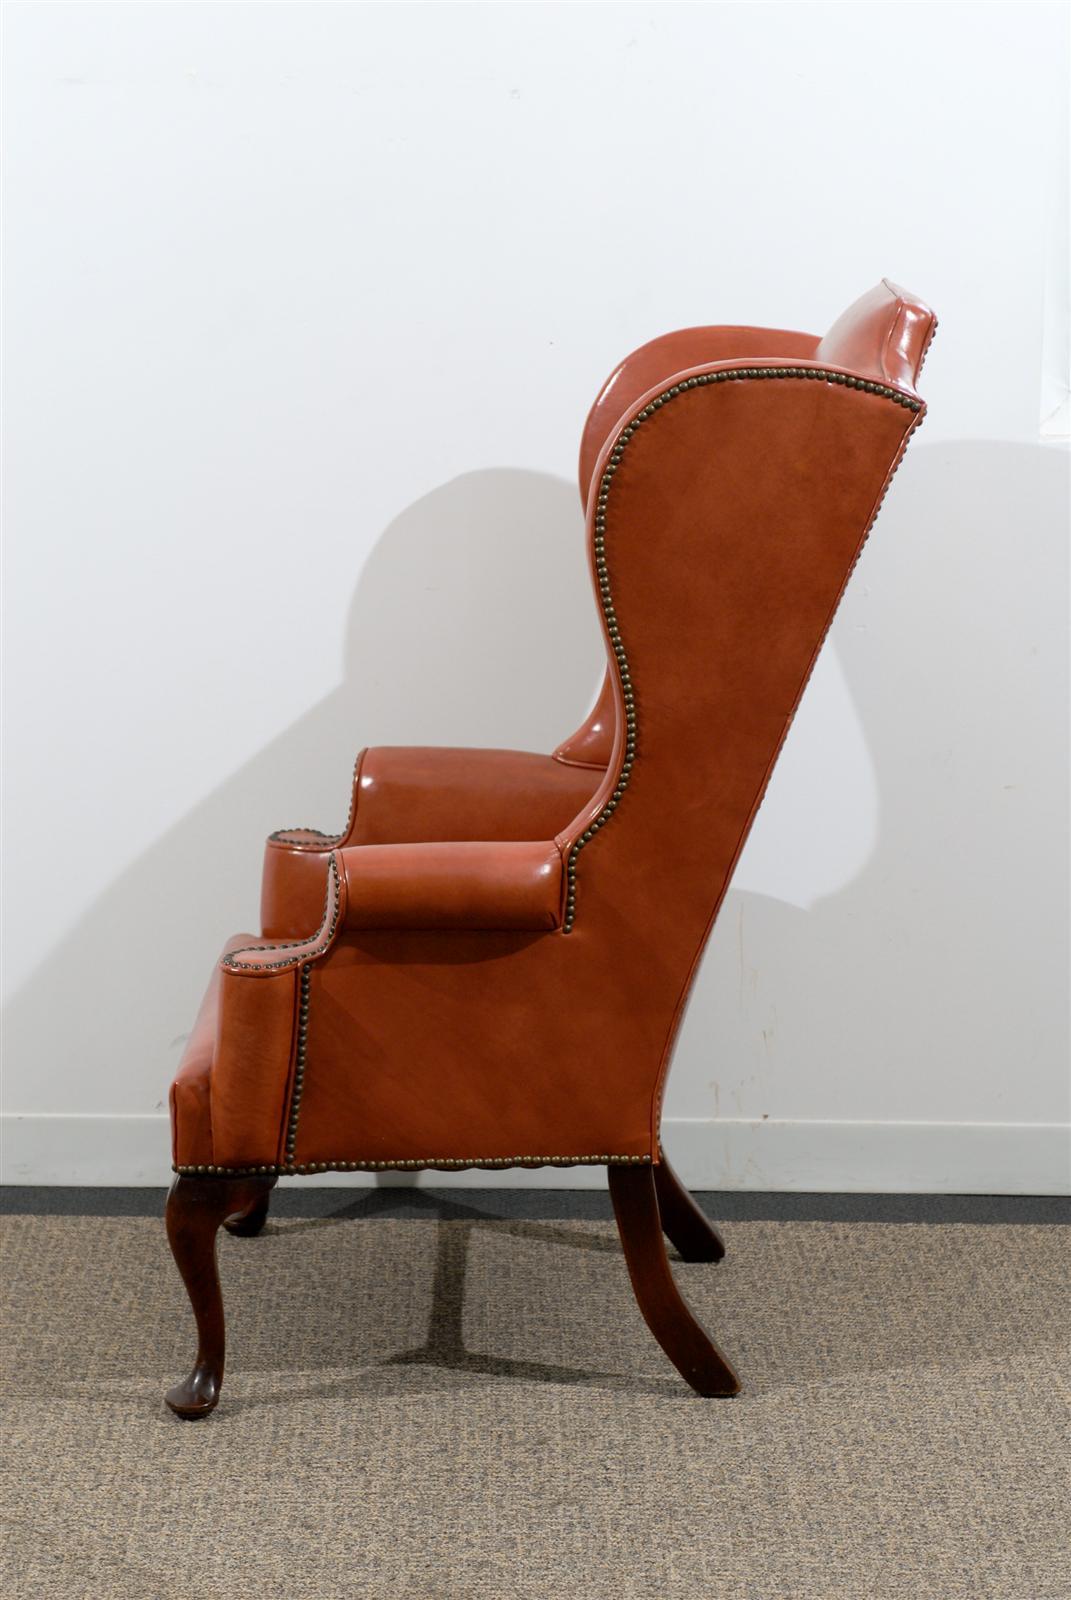 20th Century Leather Queen Anne Style Wing Chair in Burnished Orange with Nailhead Trim